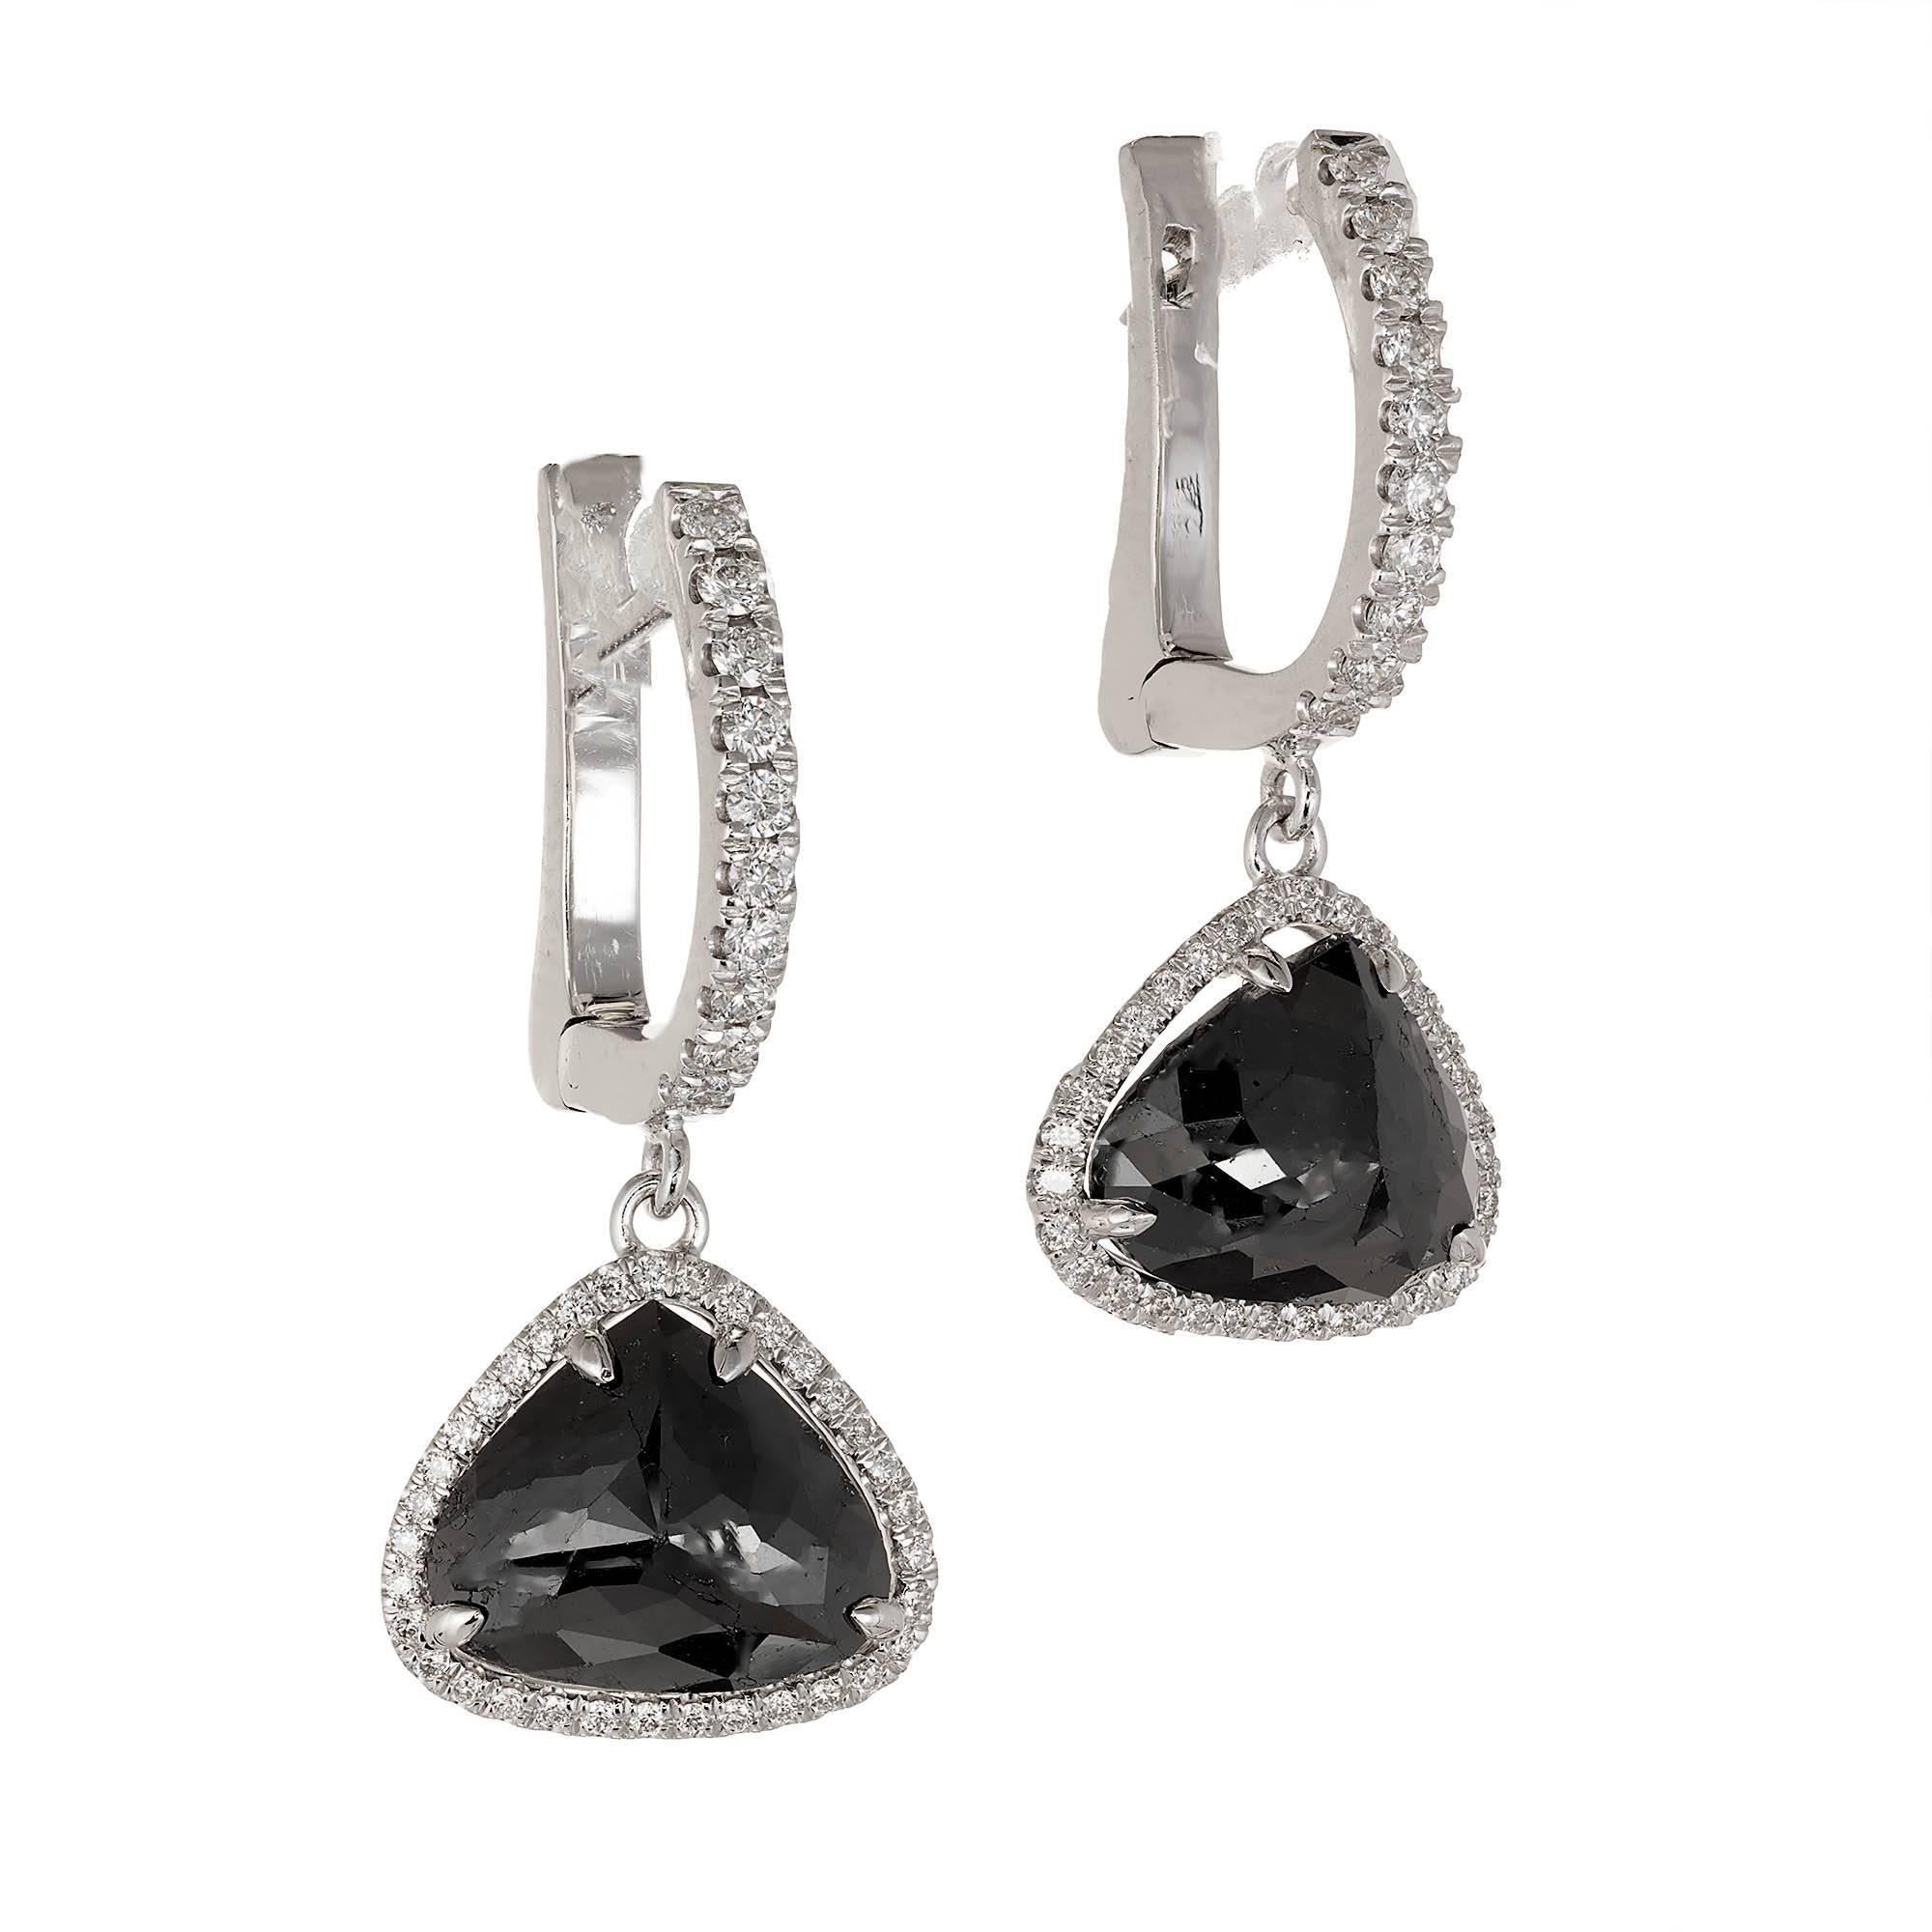 Peter Suchy black diamond halo dangle earrings 3.89cts of modified heart or pear shape. Black Diamonds GIA certified even color treated fancy black. Set in a Diamond dangle halo to form a Diamond hoop in 18k white gold. From the Peter Suchy